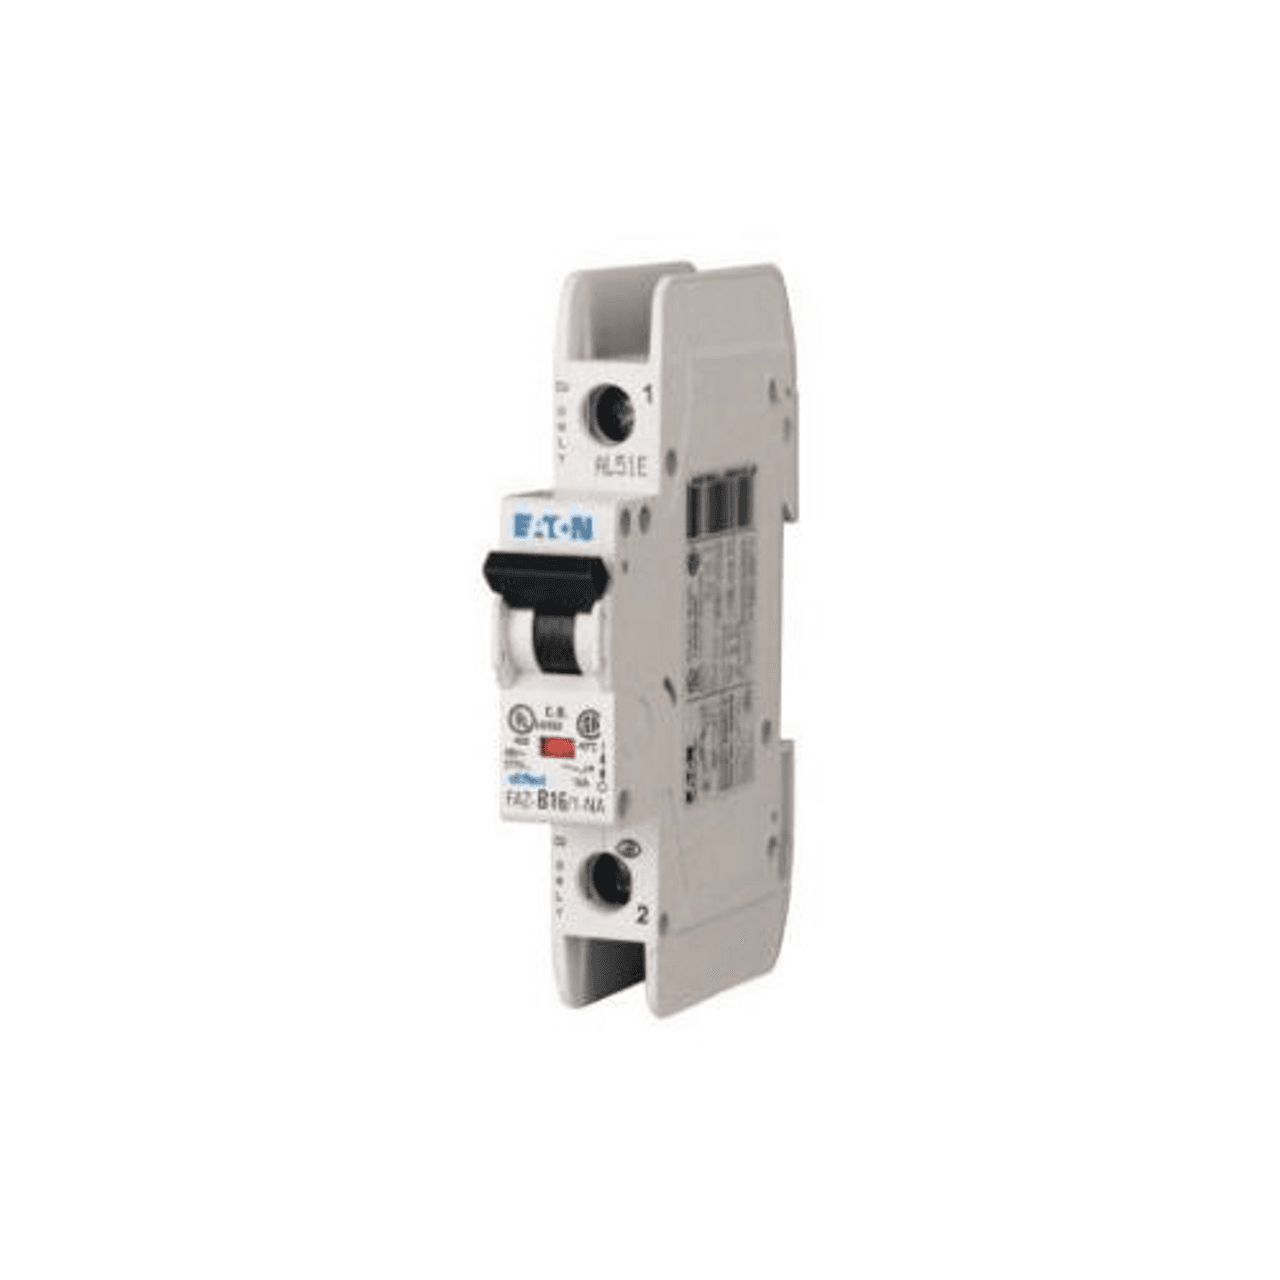 Eaton FAZ-D1.5/1-NA-SP Eaton FAZ branch protector,UL 489 Industrial miniature circuit breaker - supplementary protector,Single package,High levels of inrush current are expected,1.5 A,10 kAIC,Single-pole,277 V,10-20X /n,Q38,50-60 Hz,Screw terminals,D Curve